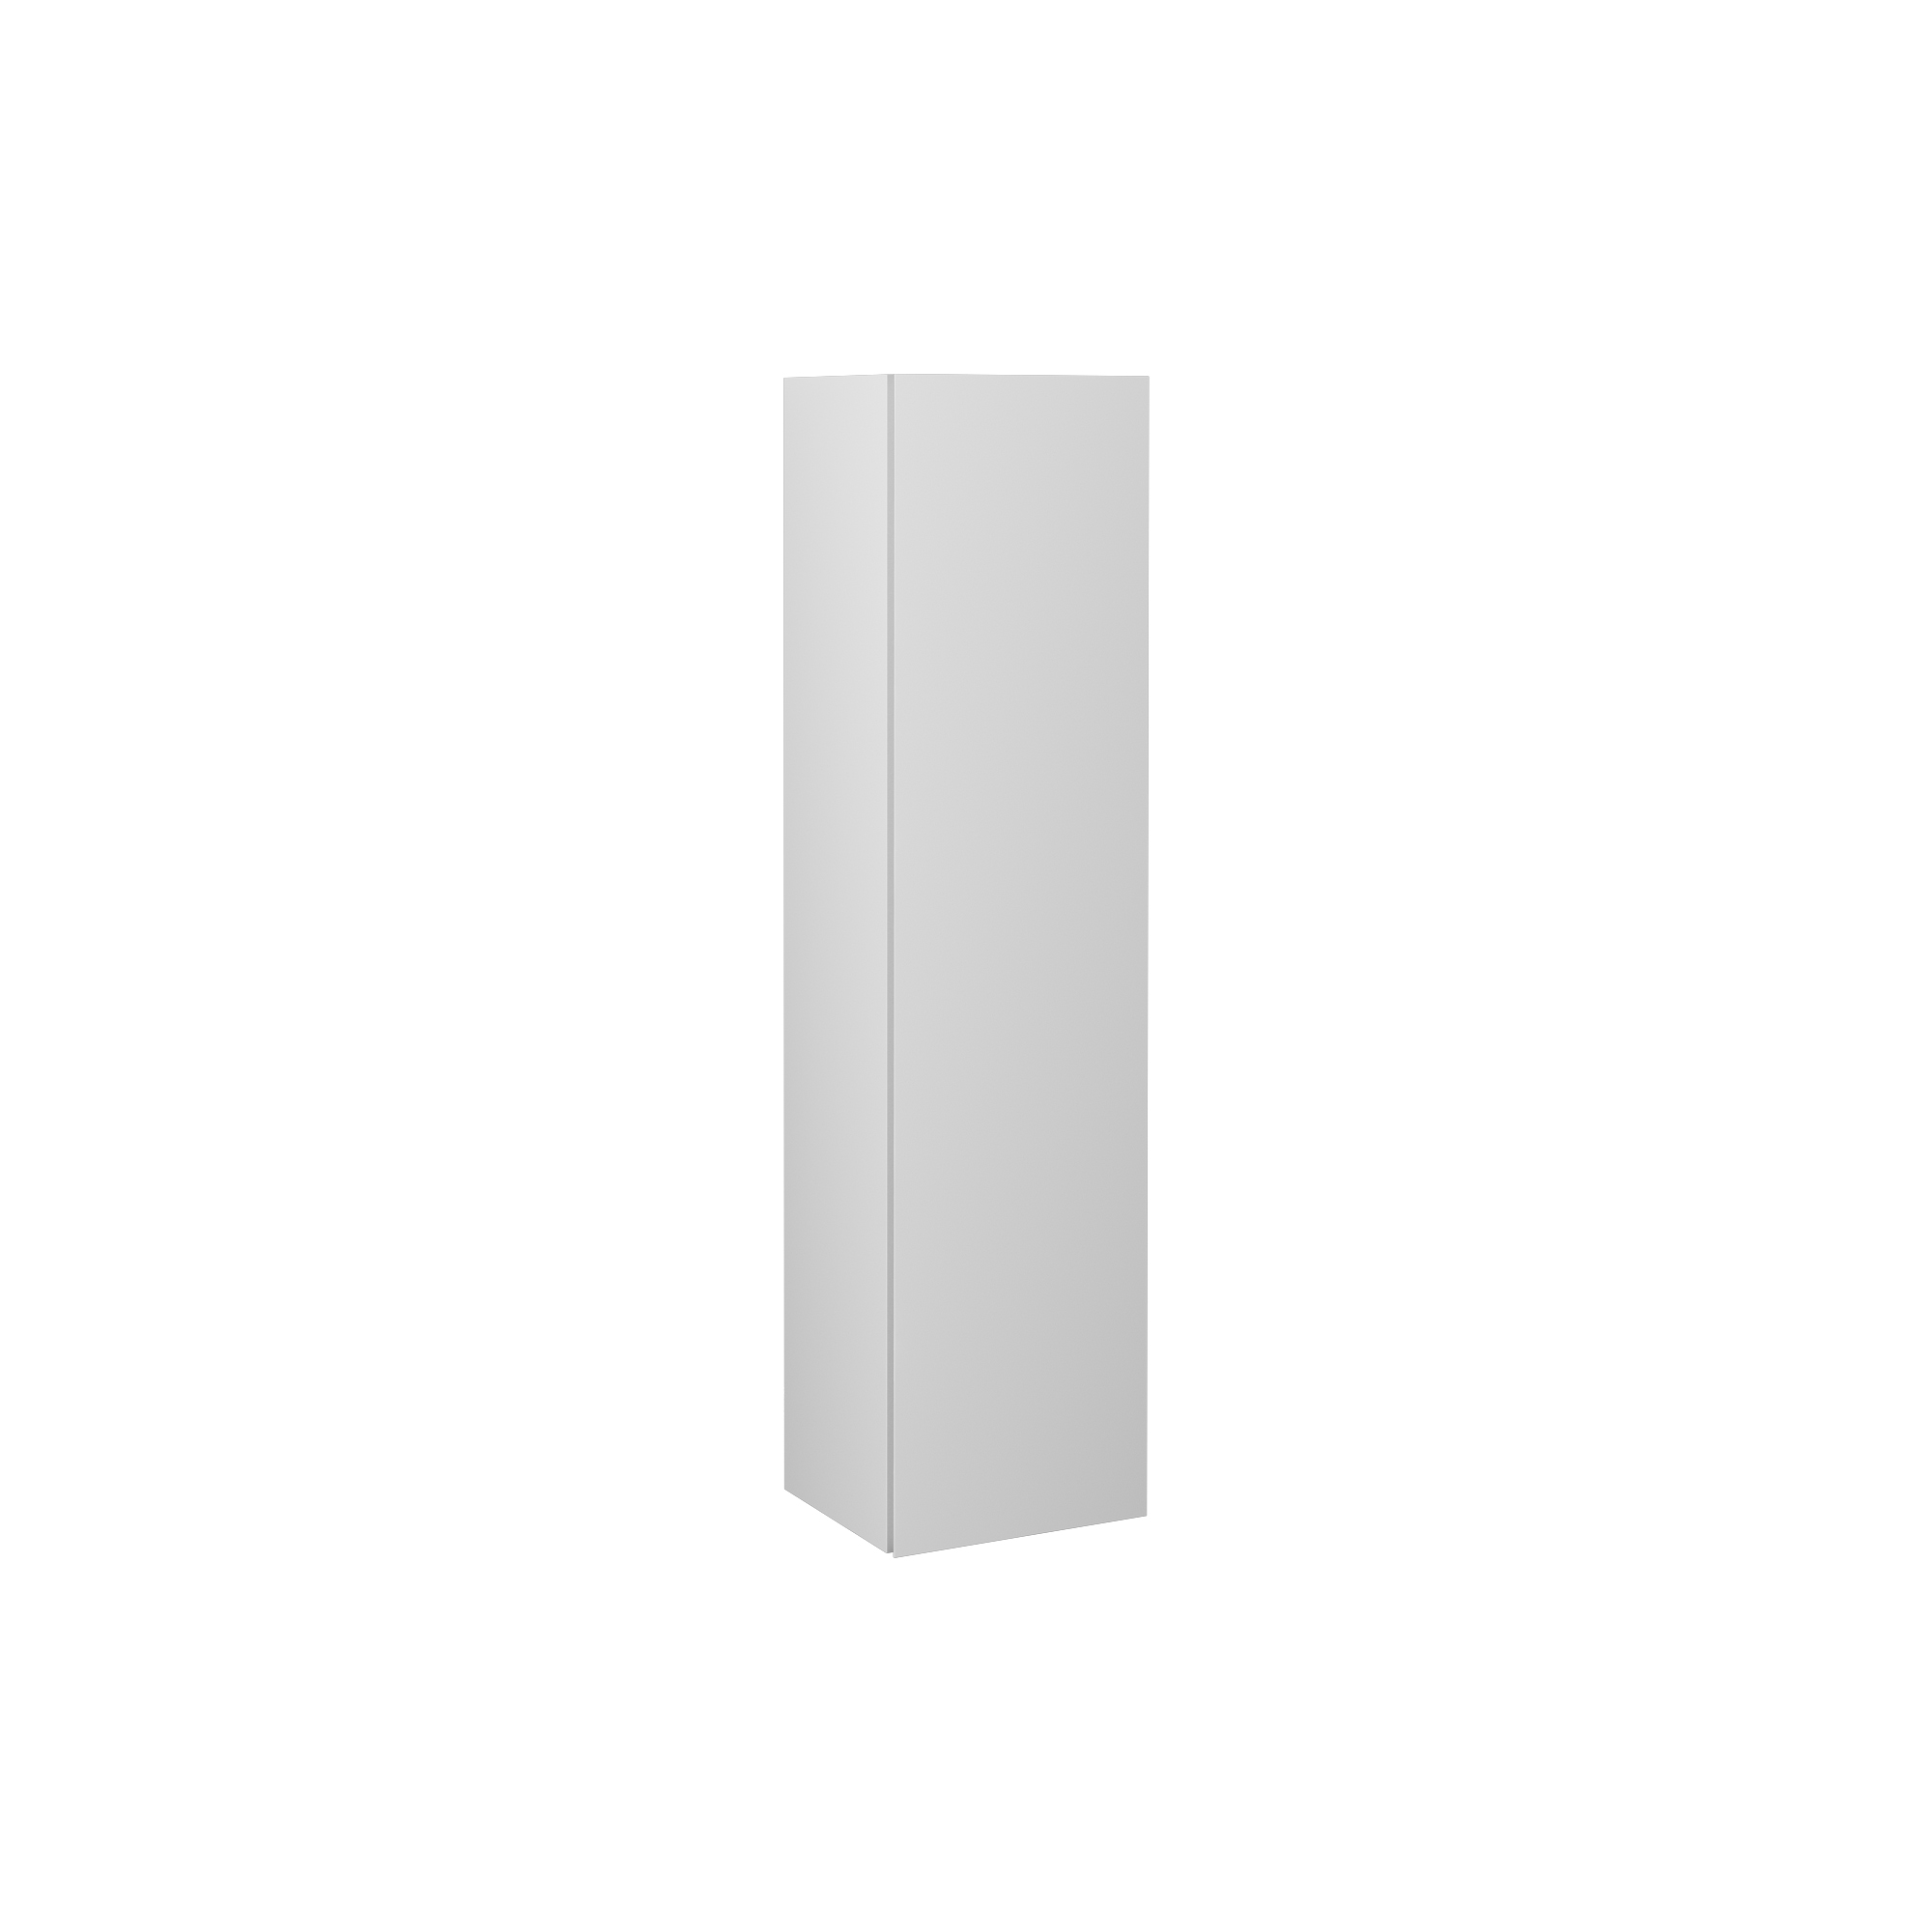 Pro 14" Tall Cabinet, White Left 